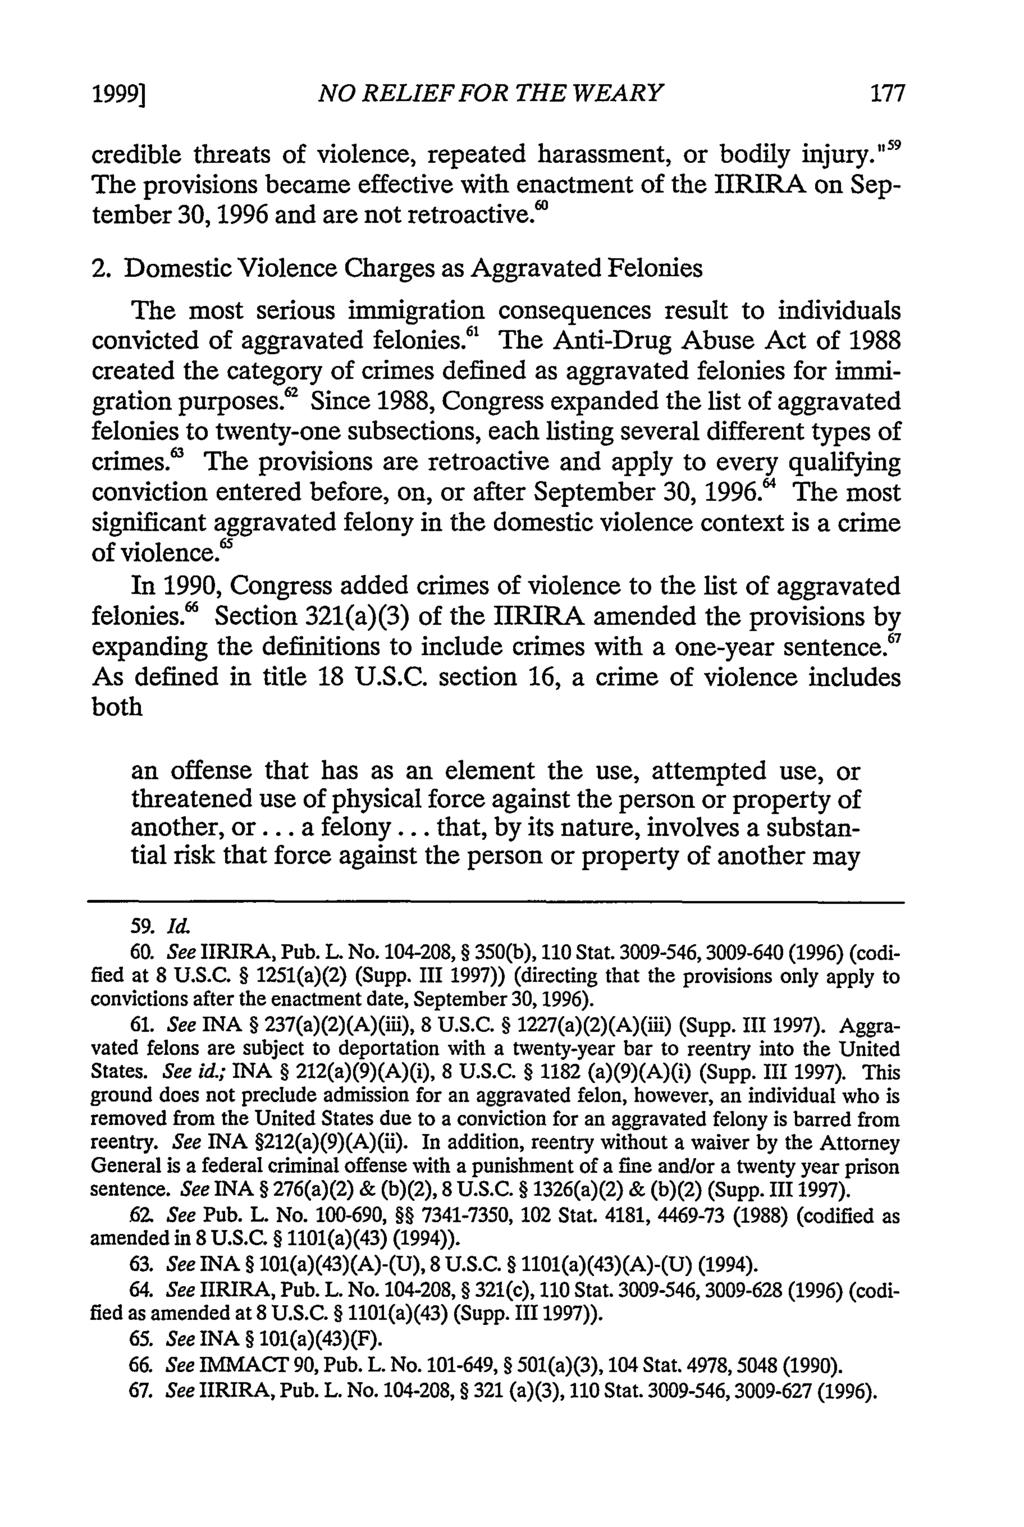 1999] NO RELIEF FOR THE WEARY credible threats of violence, repeated harassment, or bodily injury.